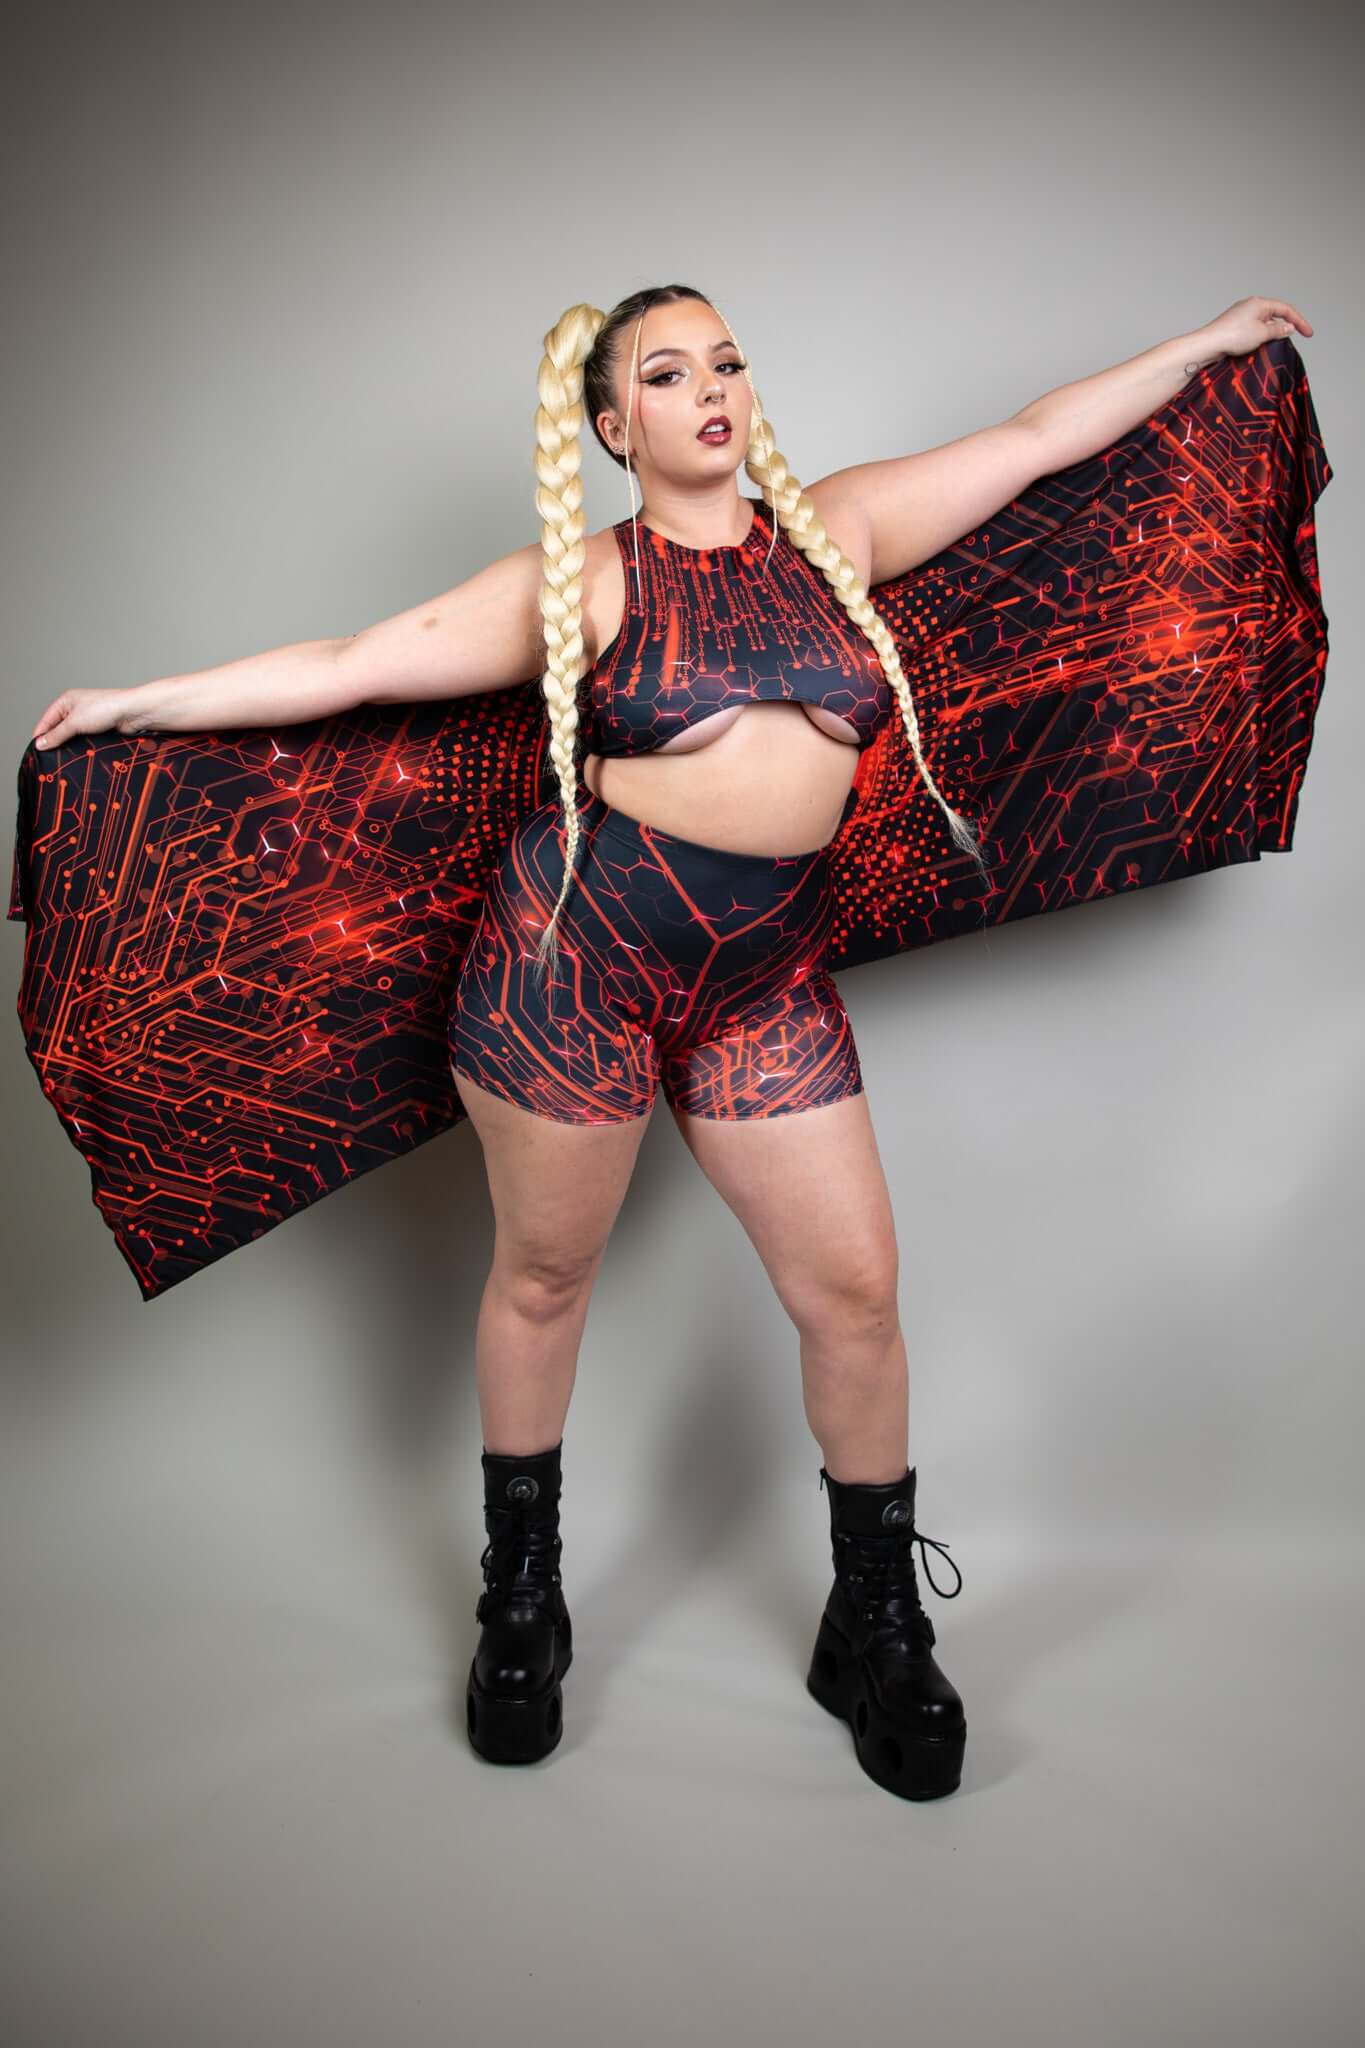 Model confidently displays Freedom Rave Wear circuit-pattern outfit and pashmina, highlighted by braided hair and chunky black boots